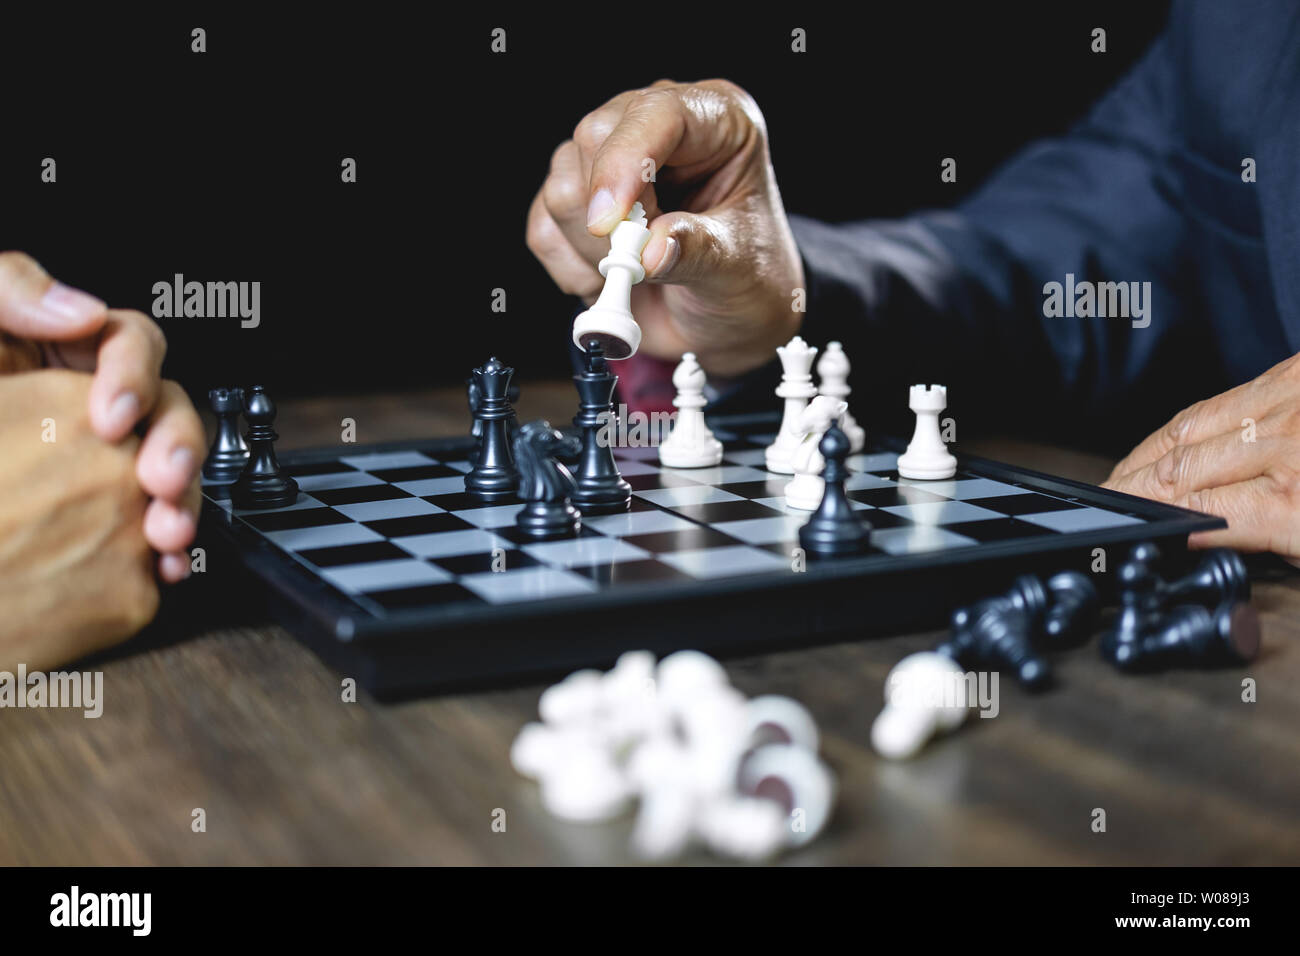 Businessman`s Hand Playing Chess Game To Development Analysis Ne Stock  Photo - Image of competition, business: 123928716